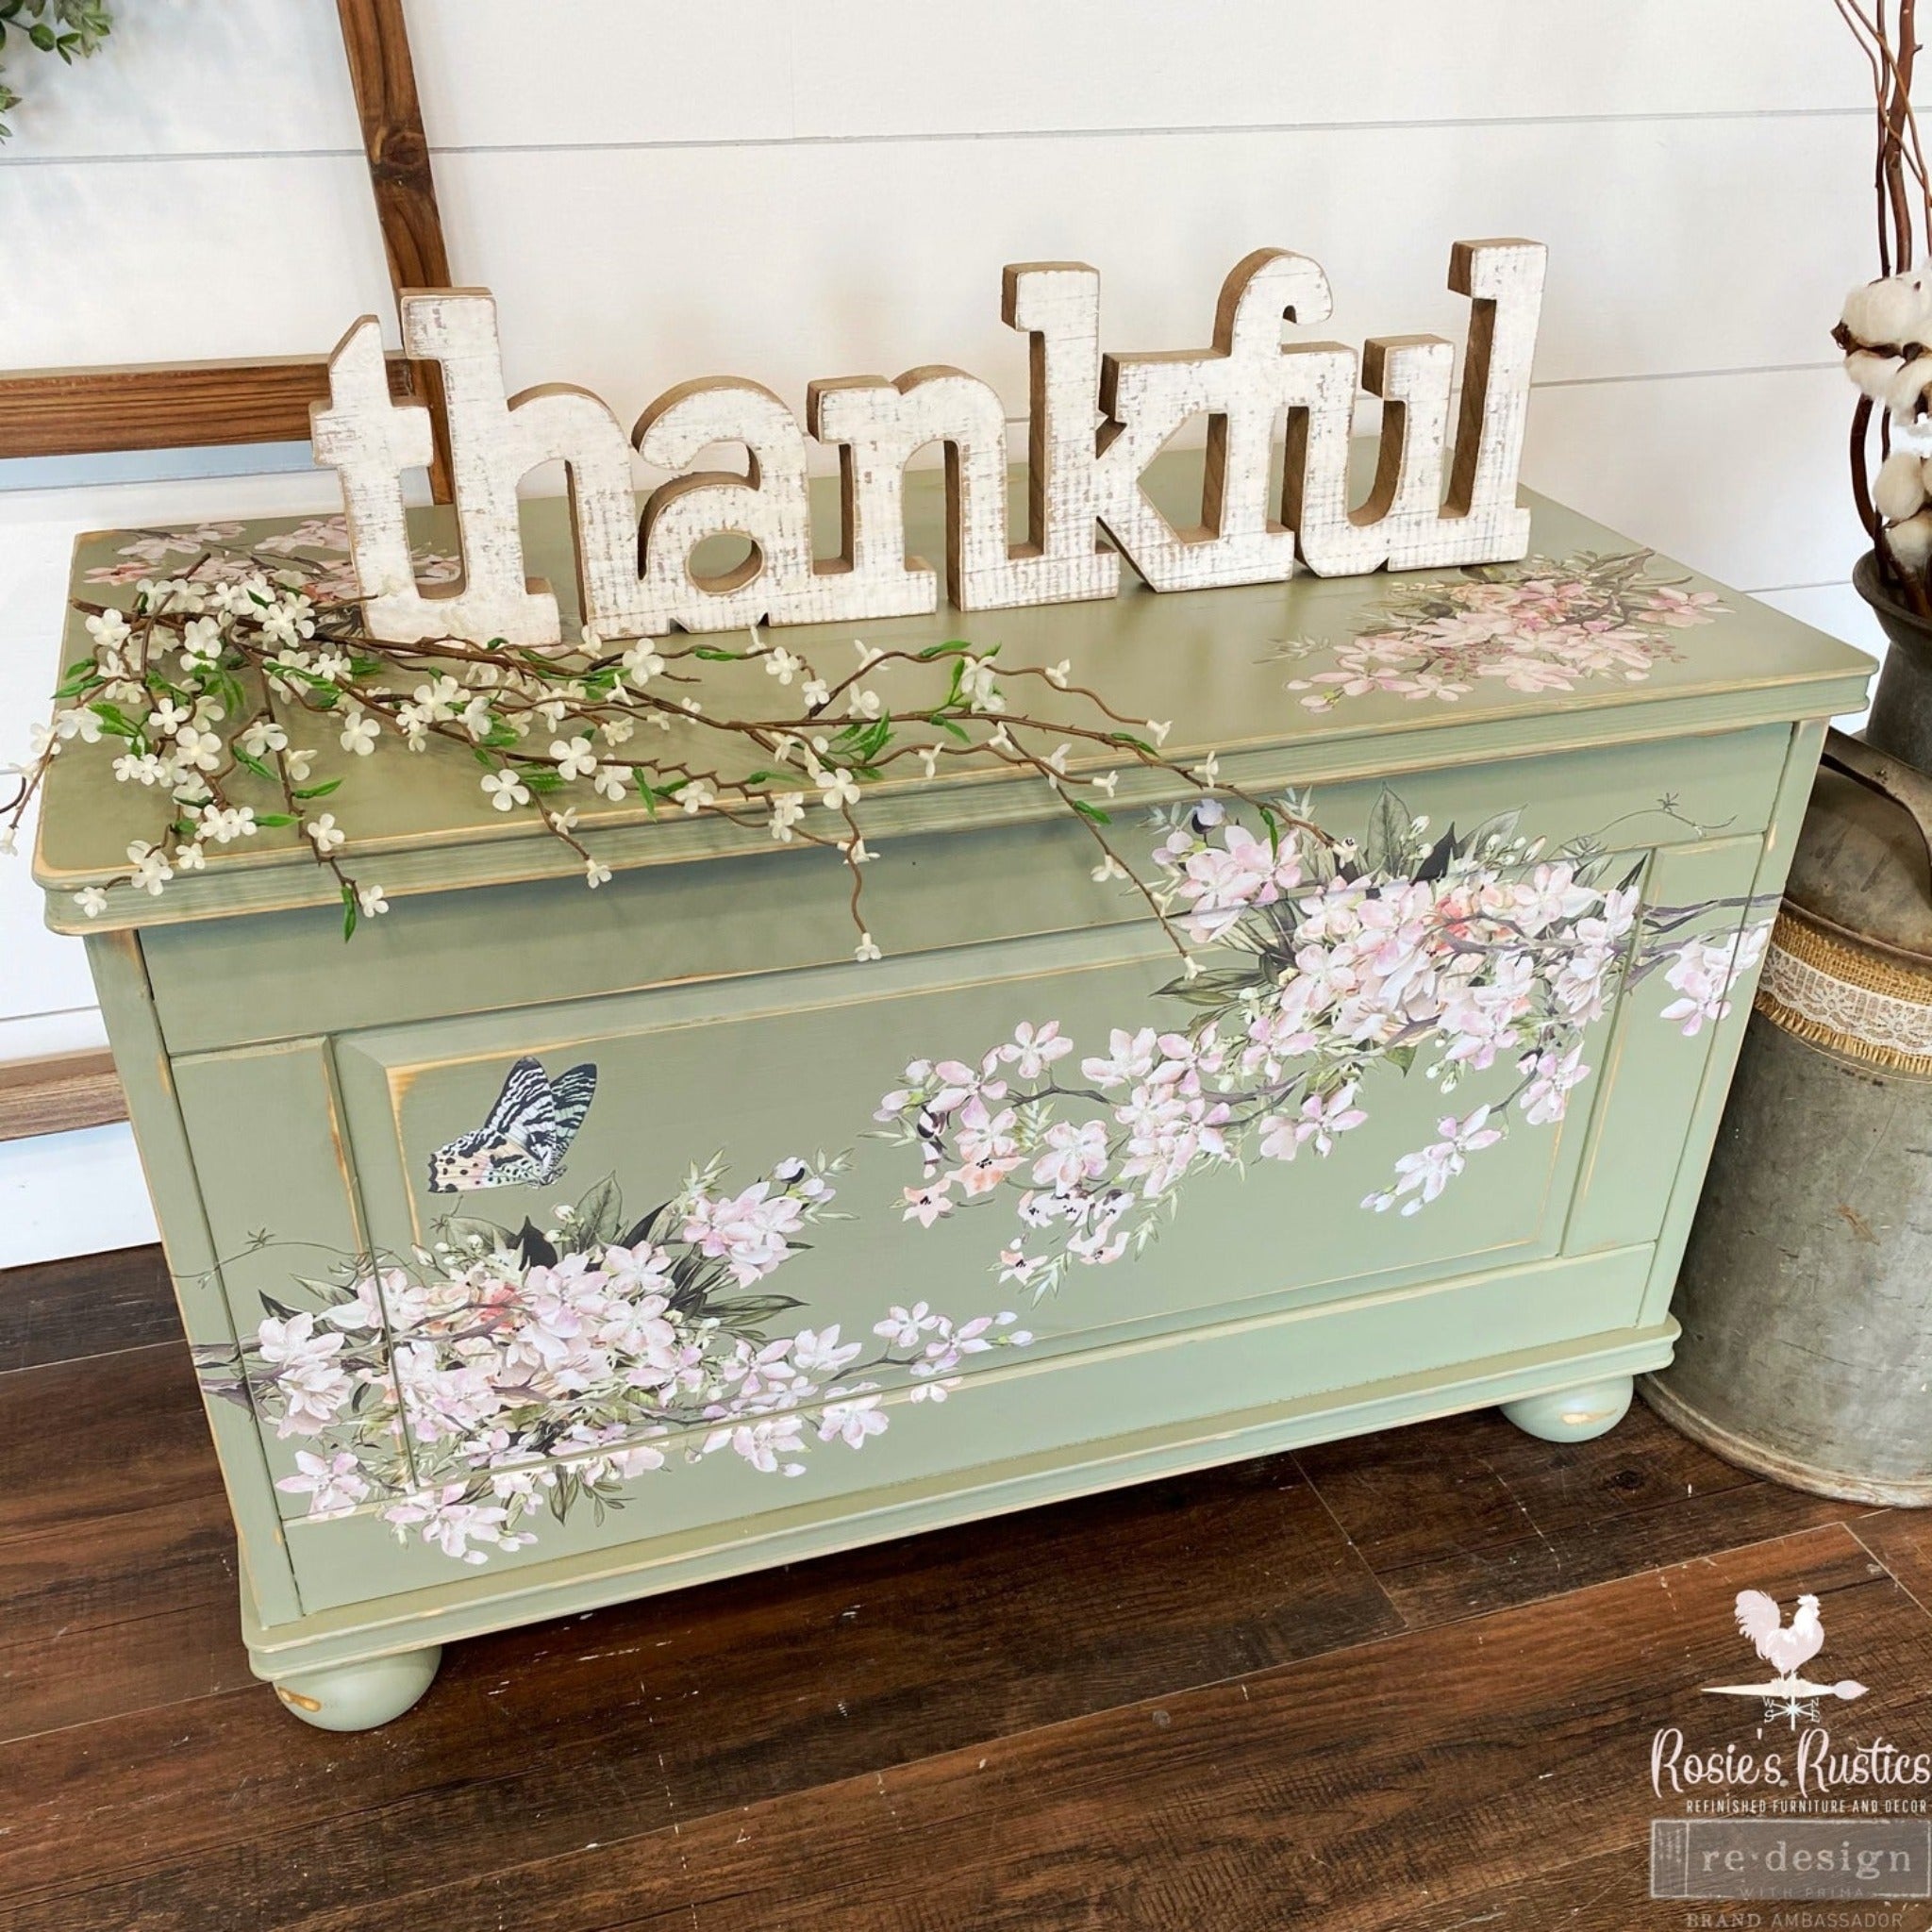 A storage chest refurbished by Rosie's Rustics is painted light green and features ReDesign with Prima's Blossom Botanica on it. A large wood cut-out that says "thankful" sits on the chest.